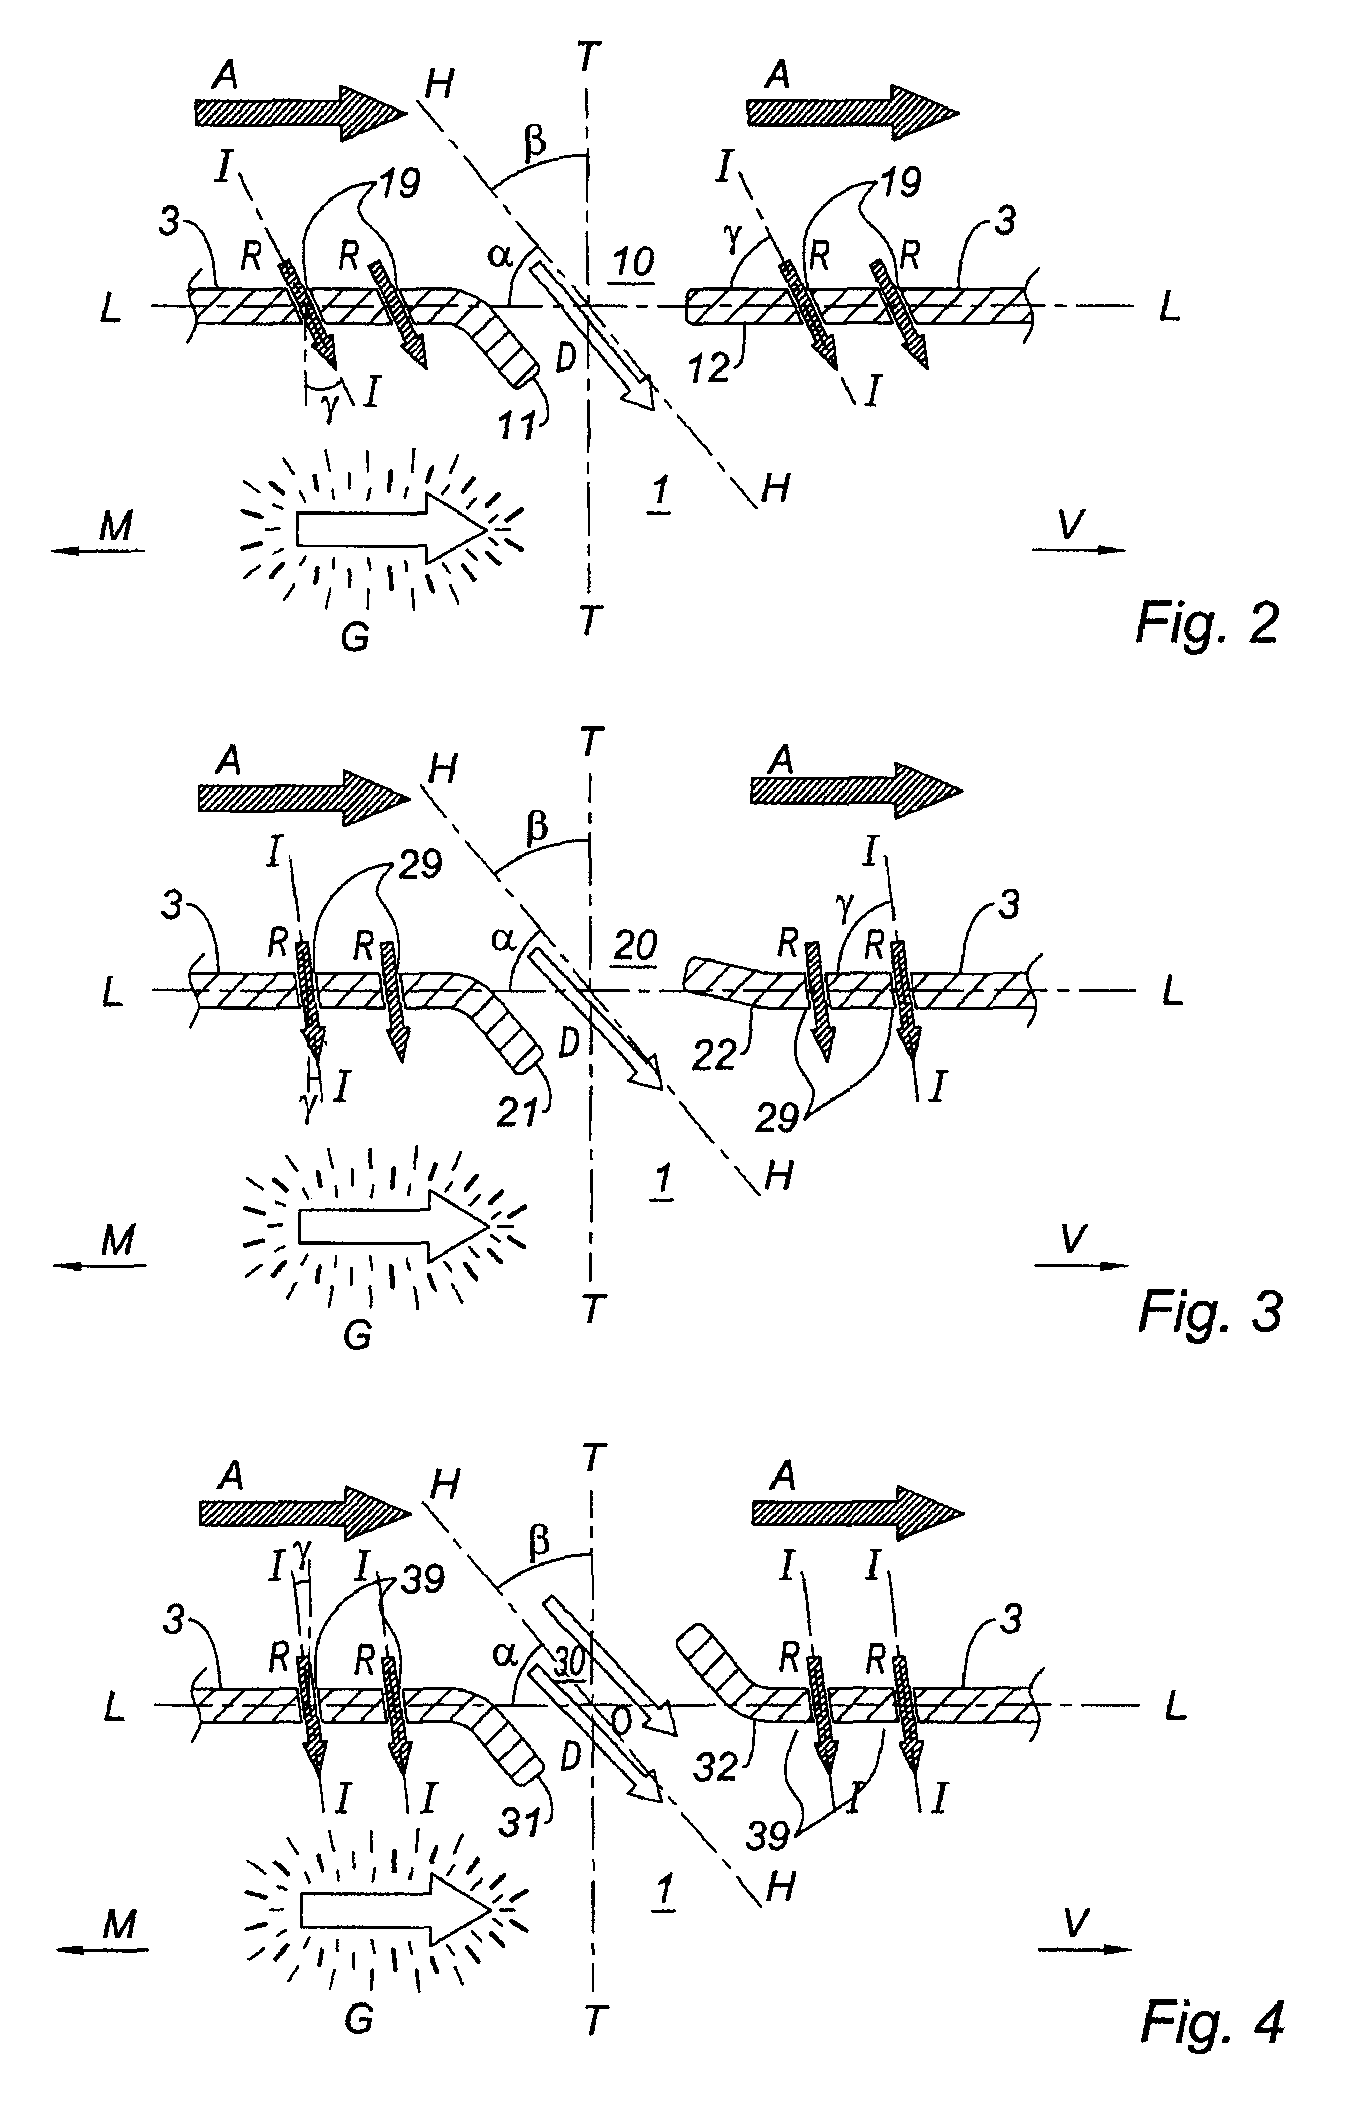 Configuration of dilution openings in a turbomachine combustion chamber wall